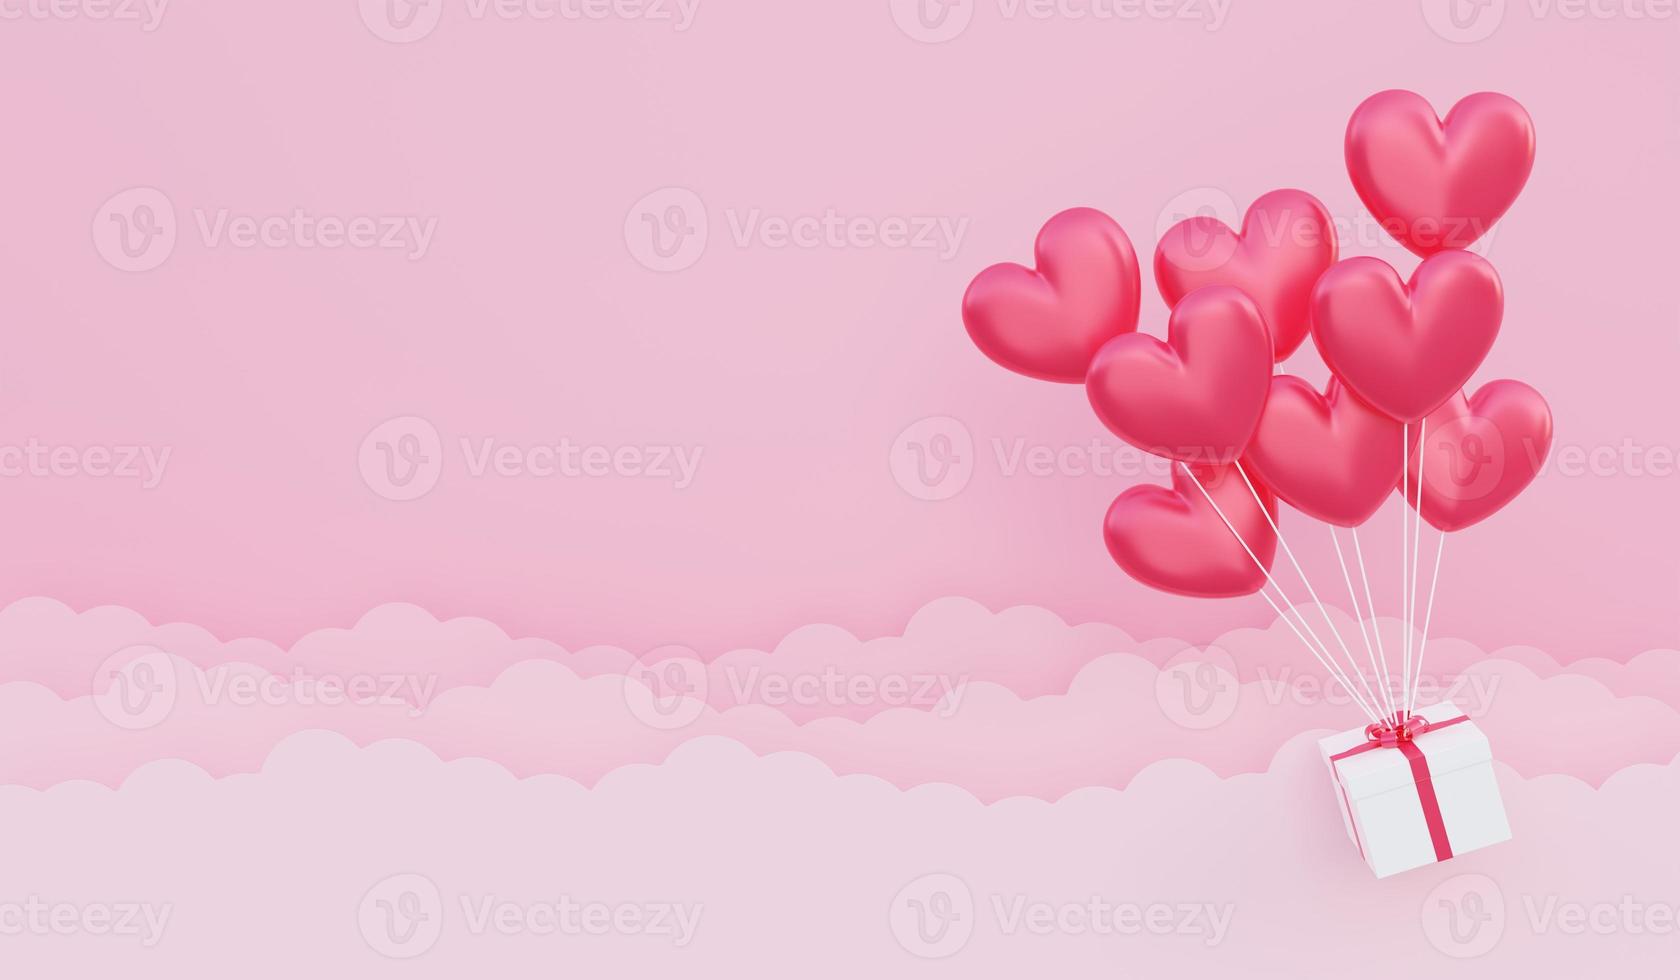 Valentine s day background, 3D illustration of red heart shaped balloons bouquet with gift box floating in the sky photo